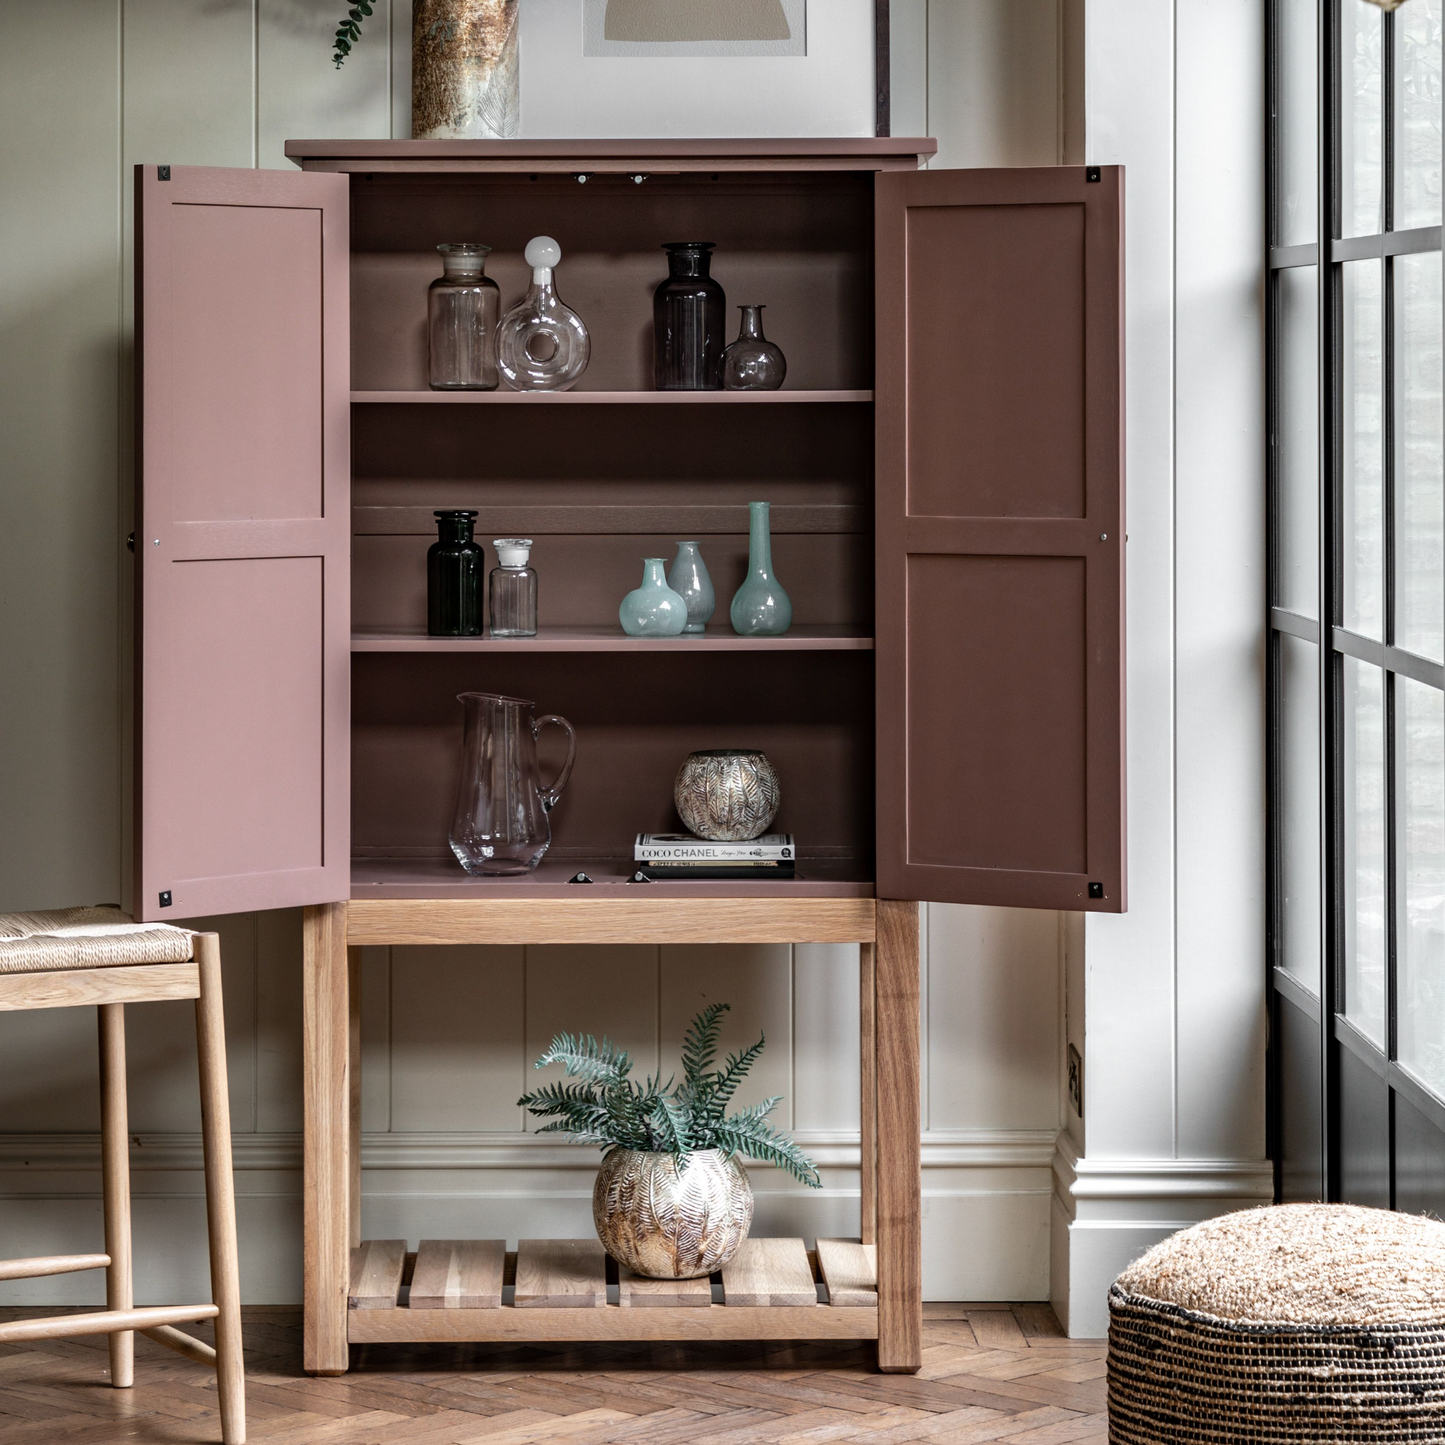 A Buckland 2 Door Storage Cupboard in Clay (w)900x(d)450x(h)1700mm for interior decor.